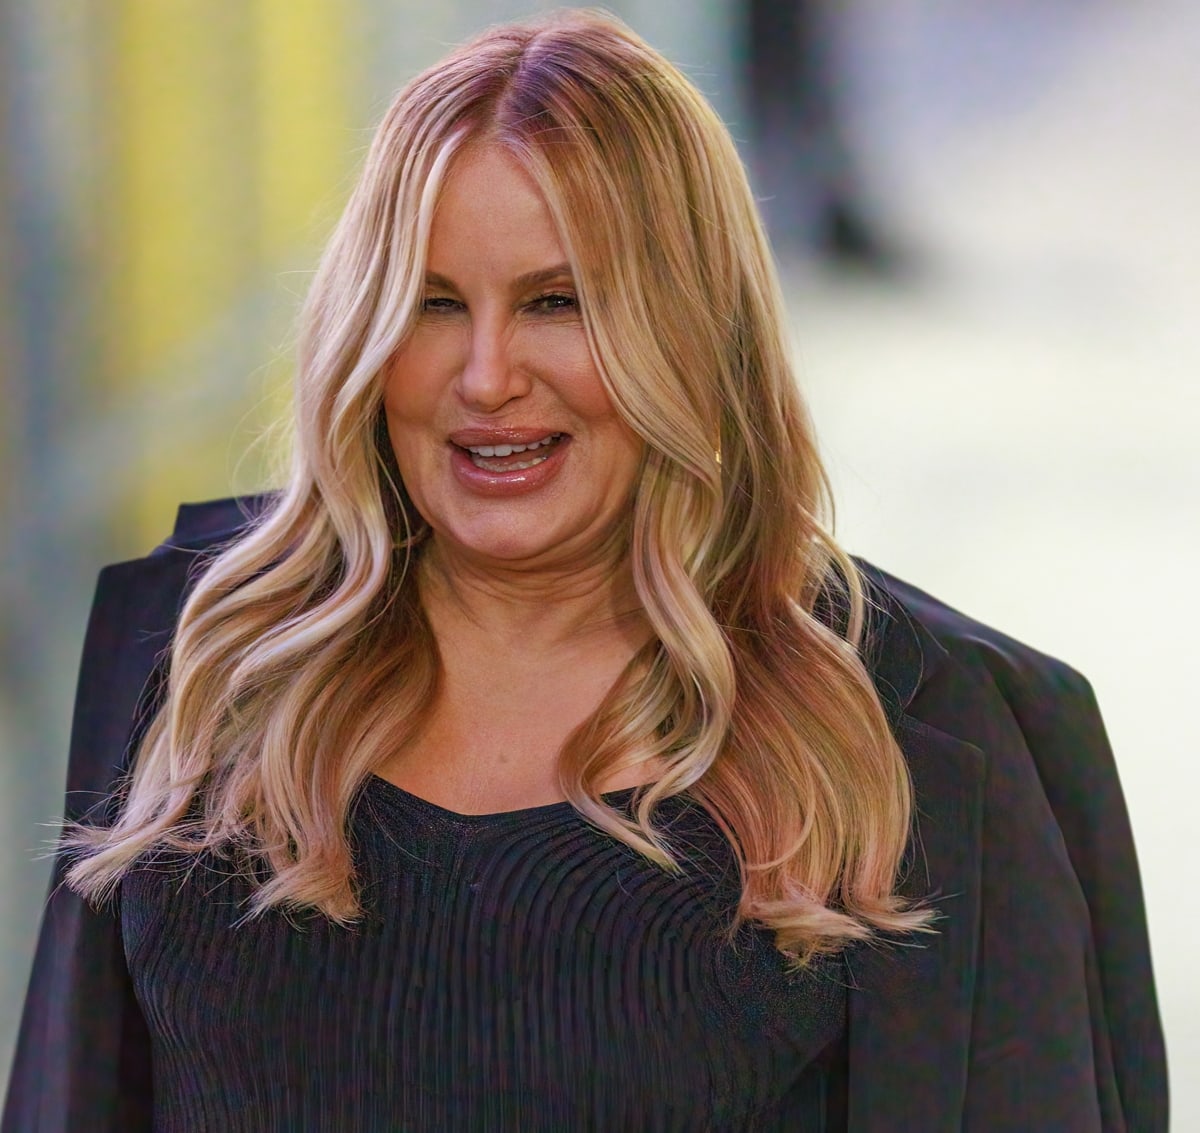 Jennifer Coolidge claims her role in American Pie helped her get laid 200 times